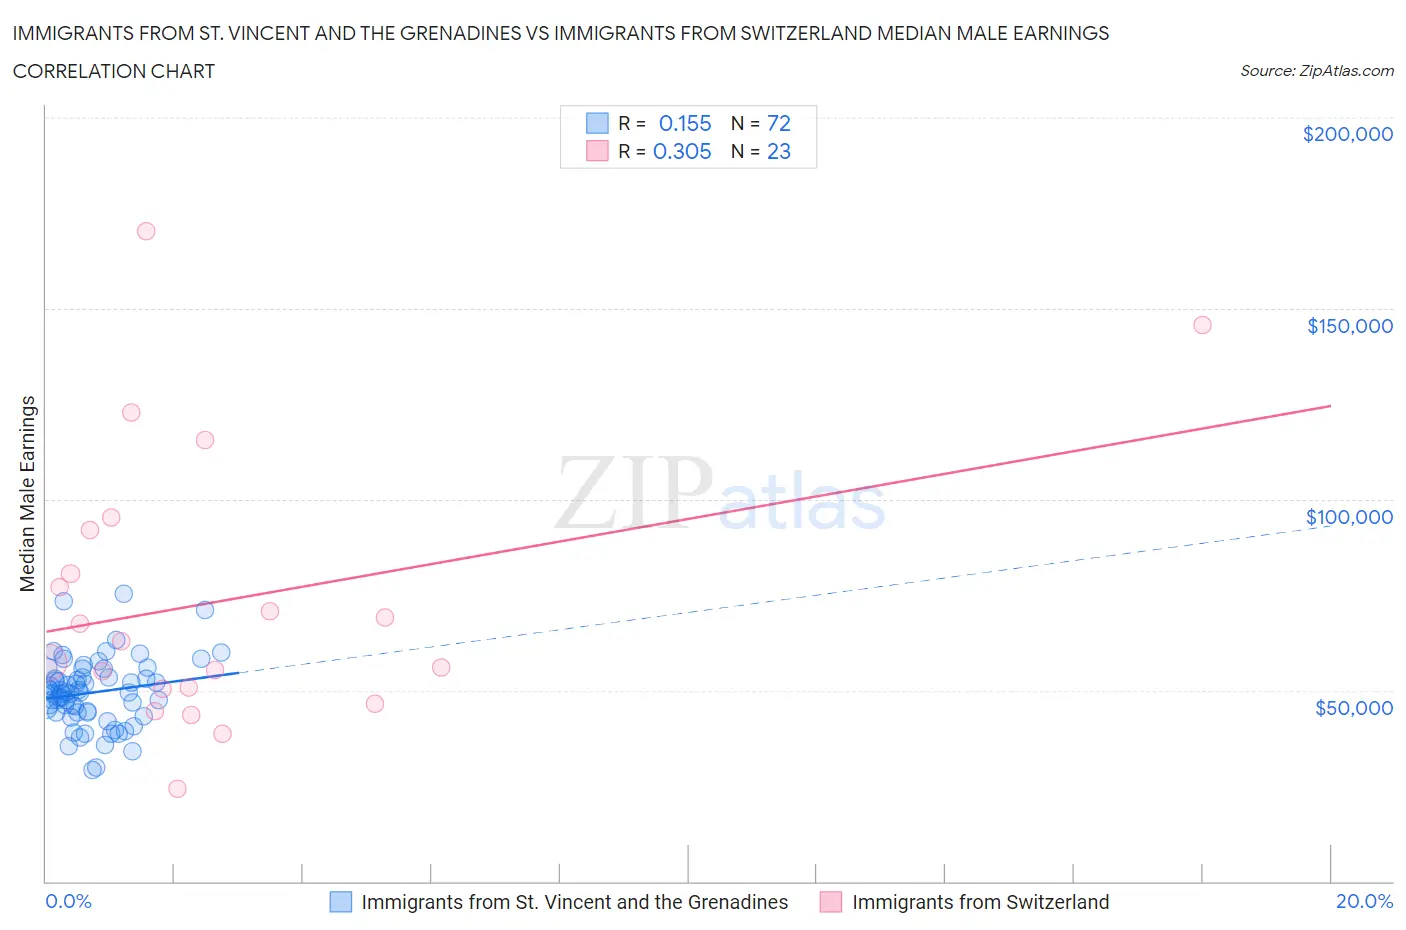 Immigrants from St. Vincent and the Grenadines vs Immigrants from Switzerland Median Male Earnings